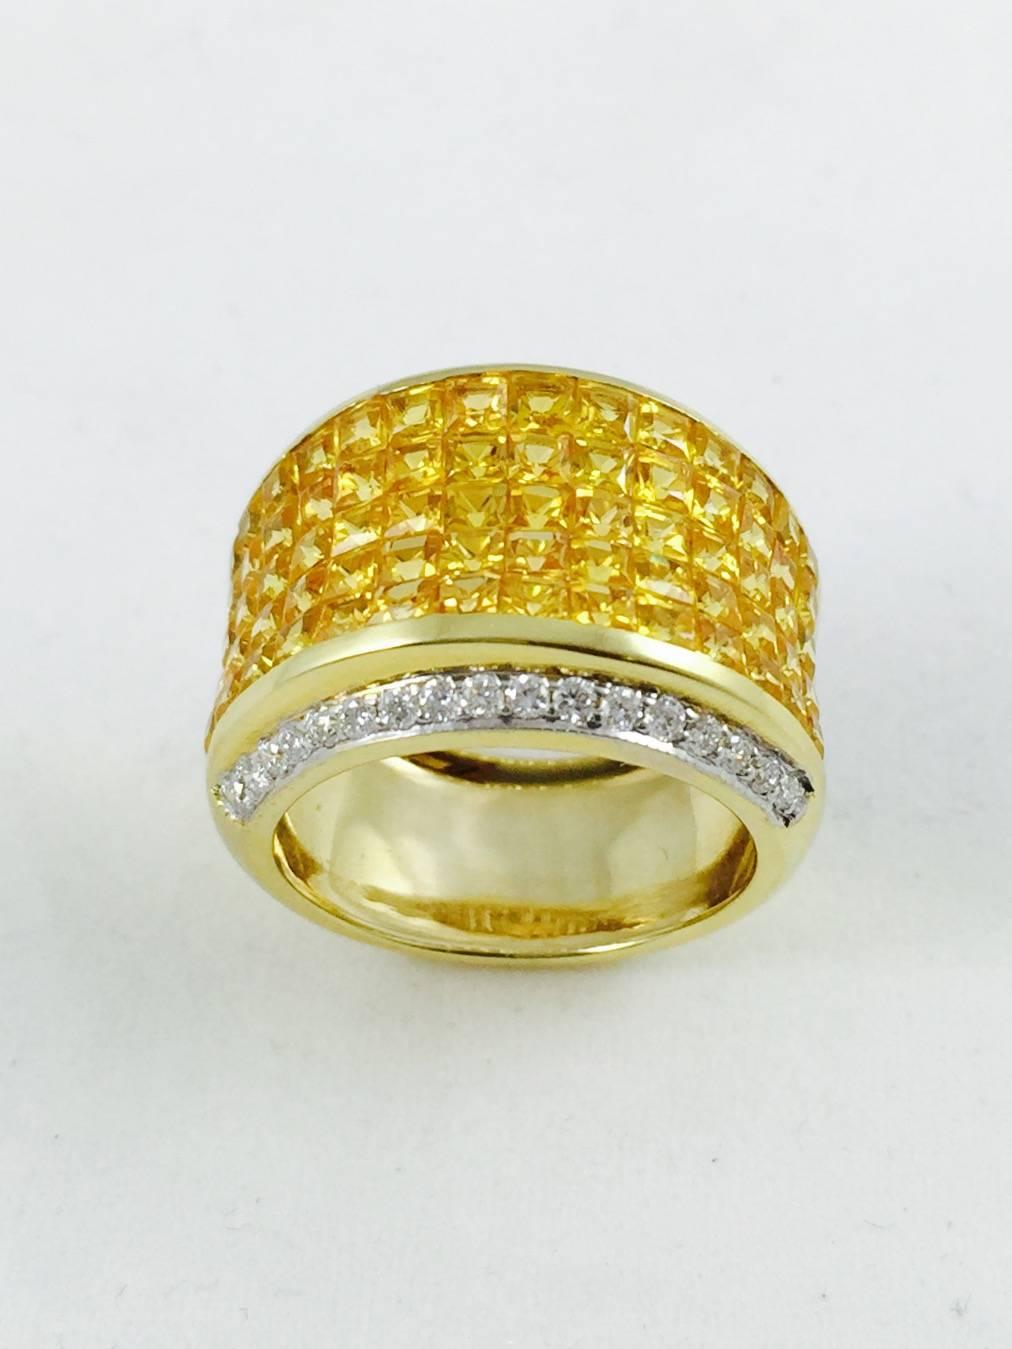 Impeccably crafted in Europe, this stunning 18K yellow gold tapered band style ring has row upon row of invisibly set, perfectly matched, princess cut yellow sapphires.  Bordered top and bottom by a row of channel set brilliant cut diamonds.  Size 7